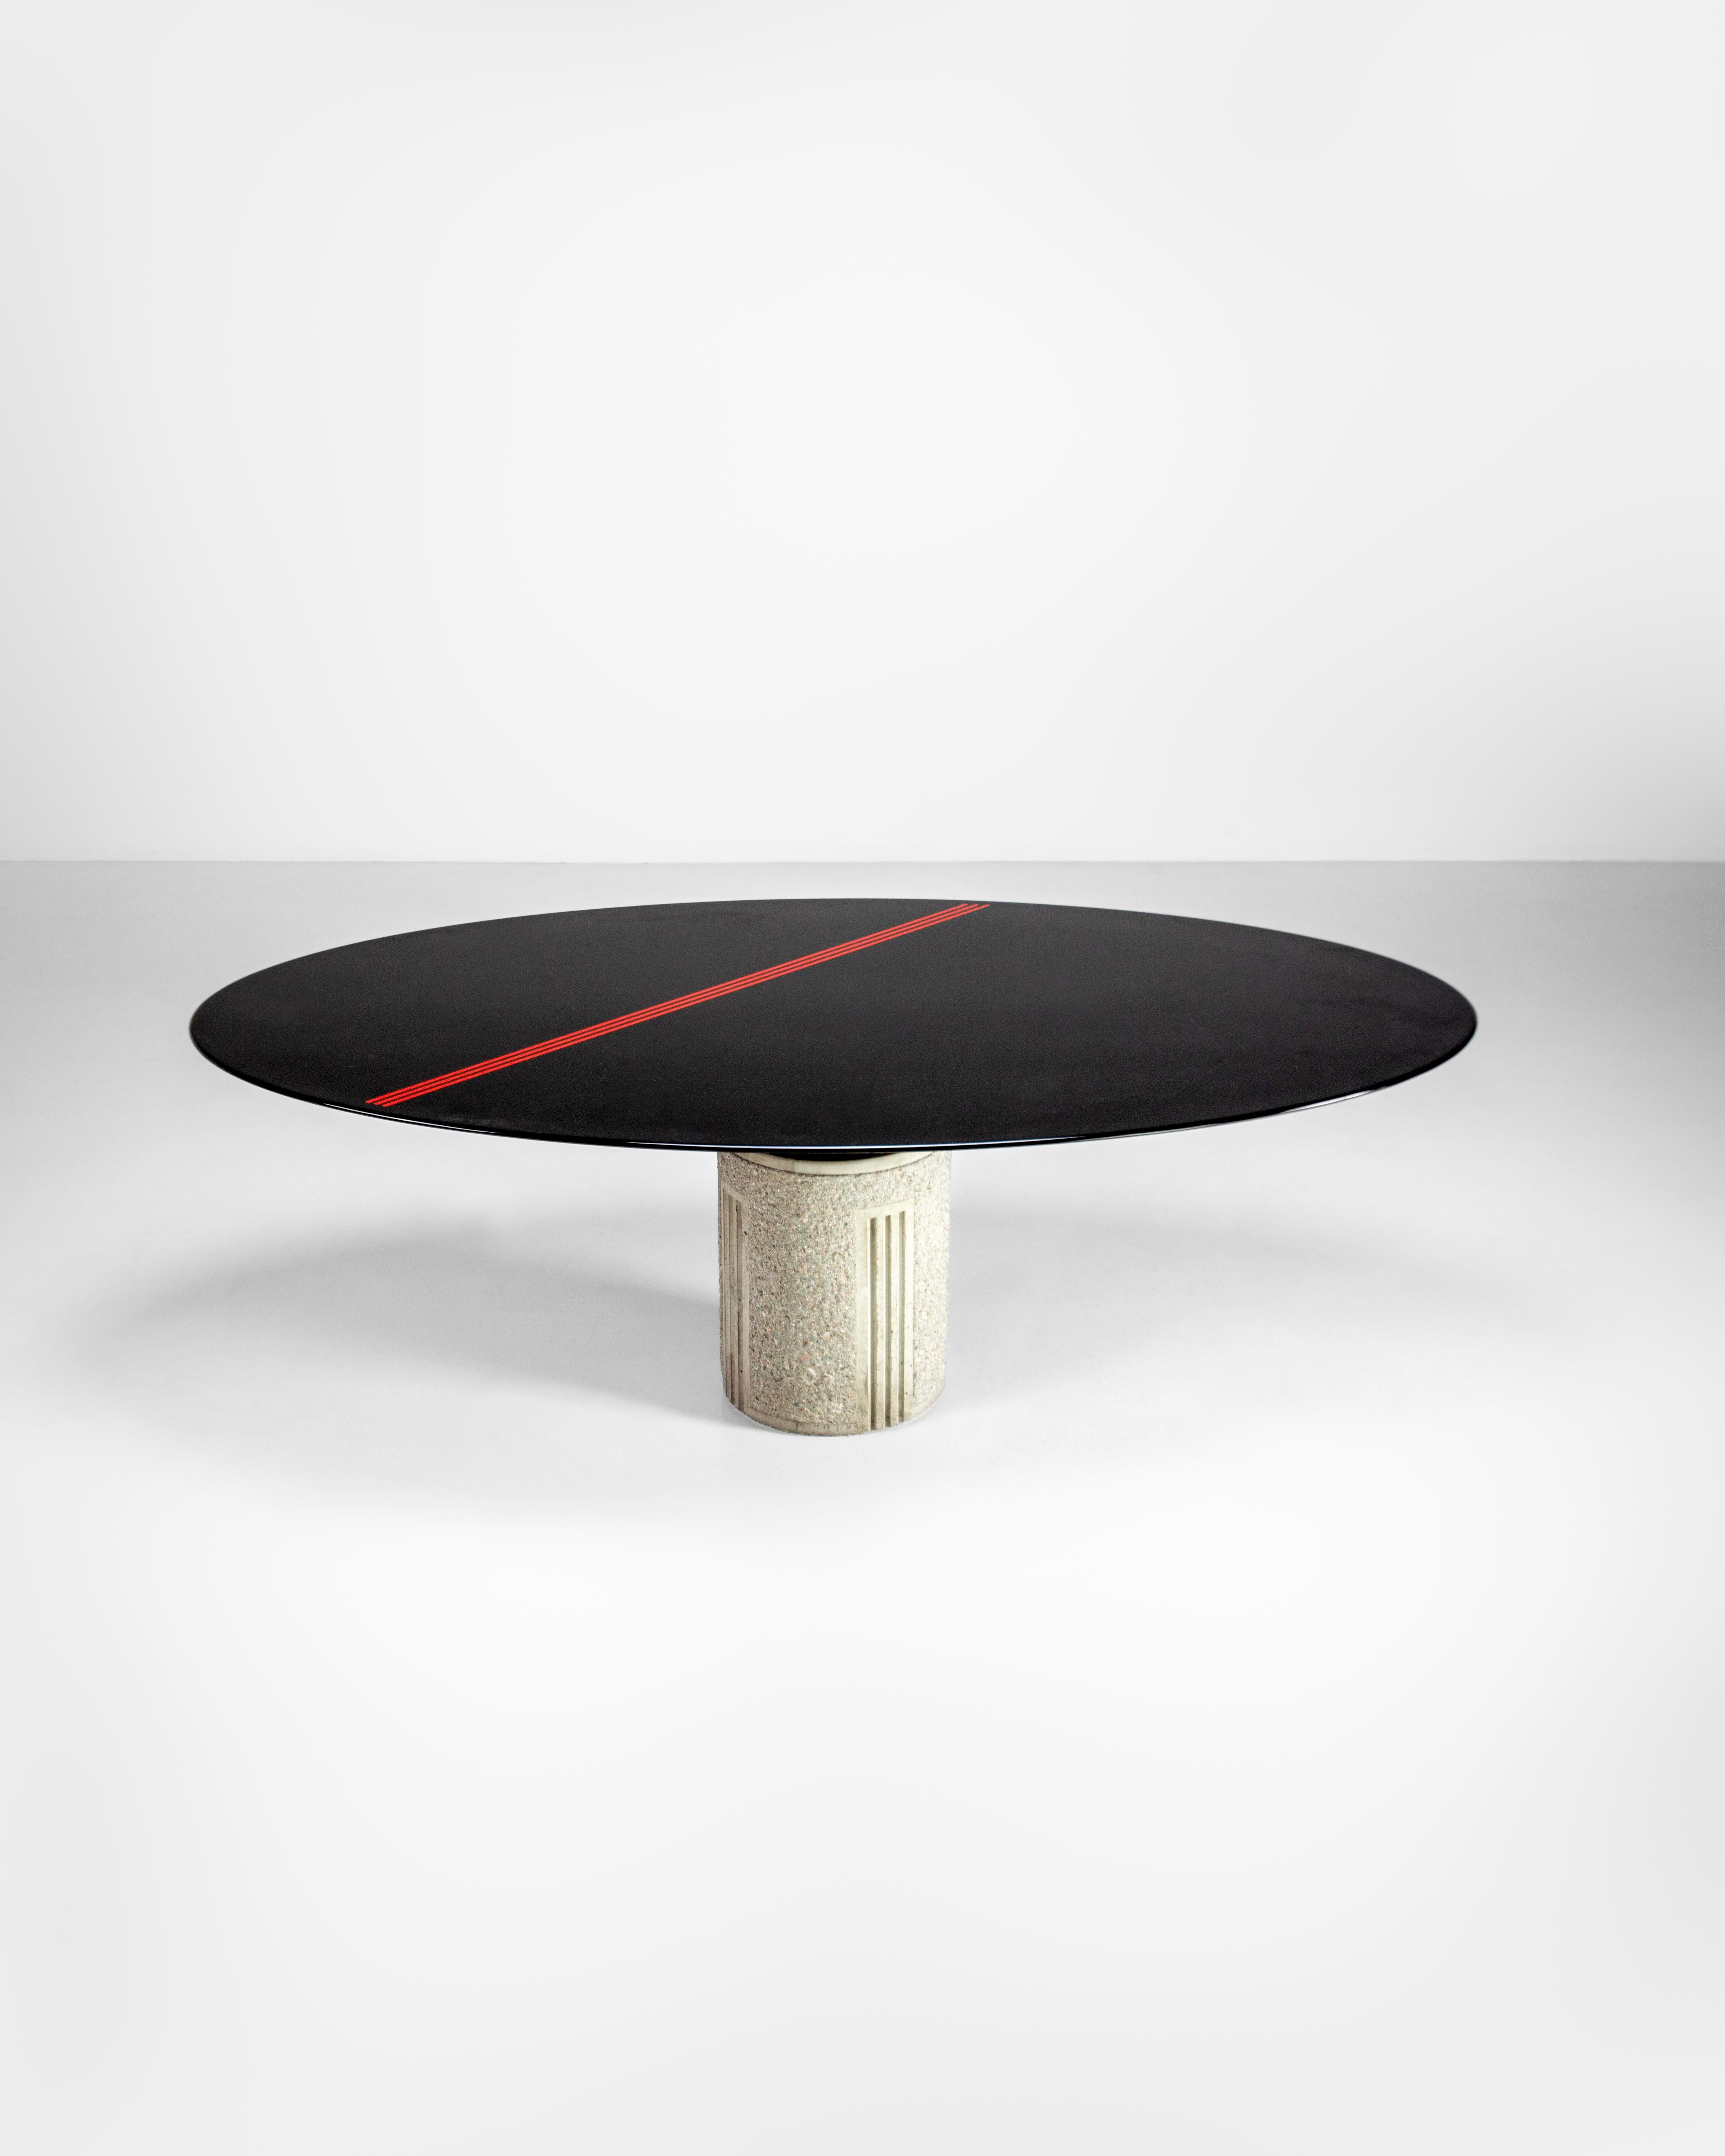 Saporiti is one of the most innovative Italian design companies and among those that have experimented the most with materials, forms and innovations in the broadest sense. This dining table has an imposing cylindrical base of carved and engraved